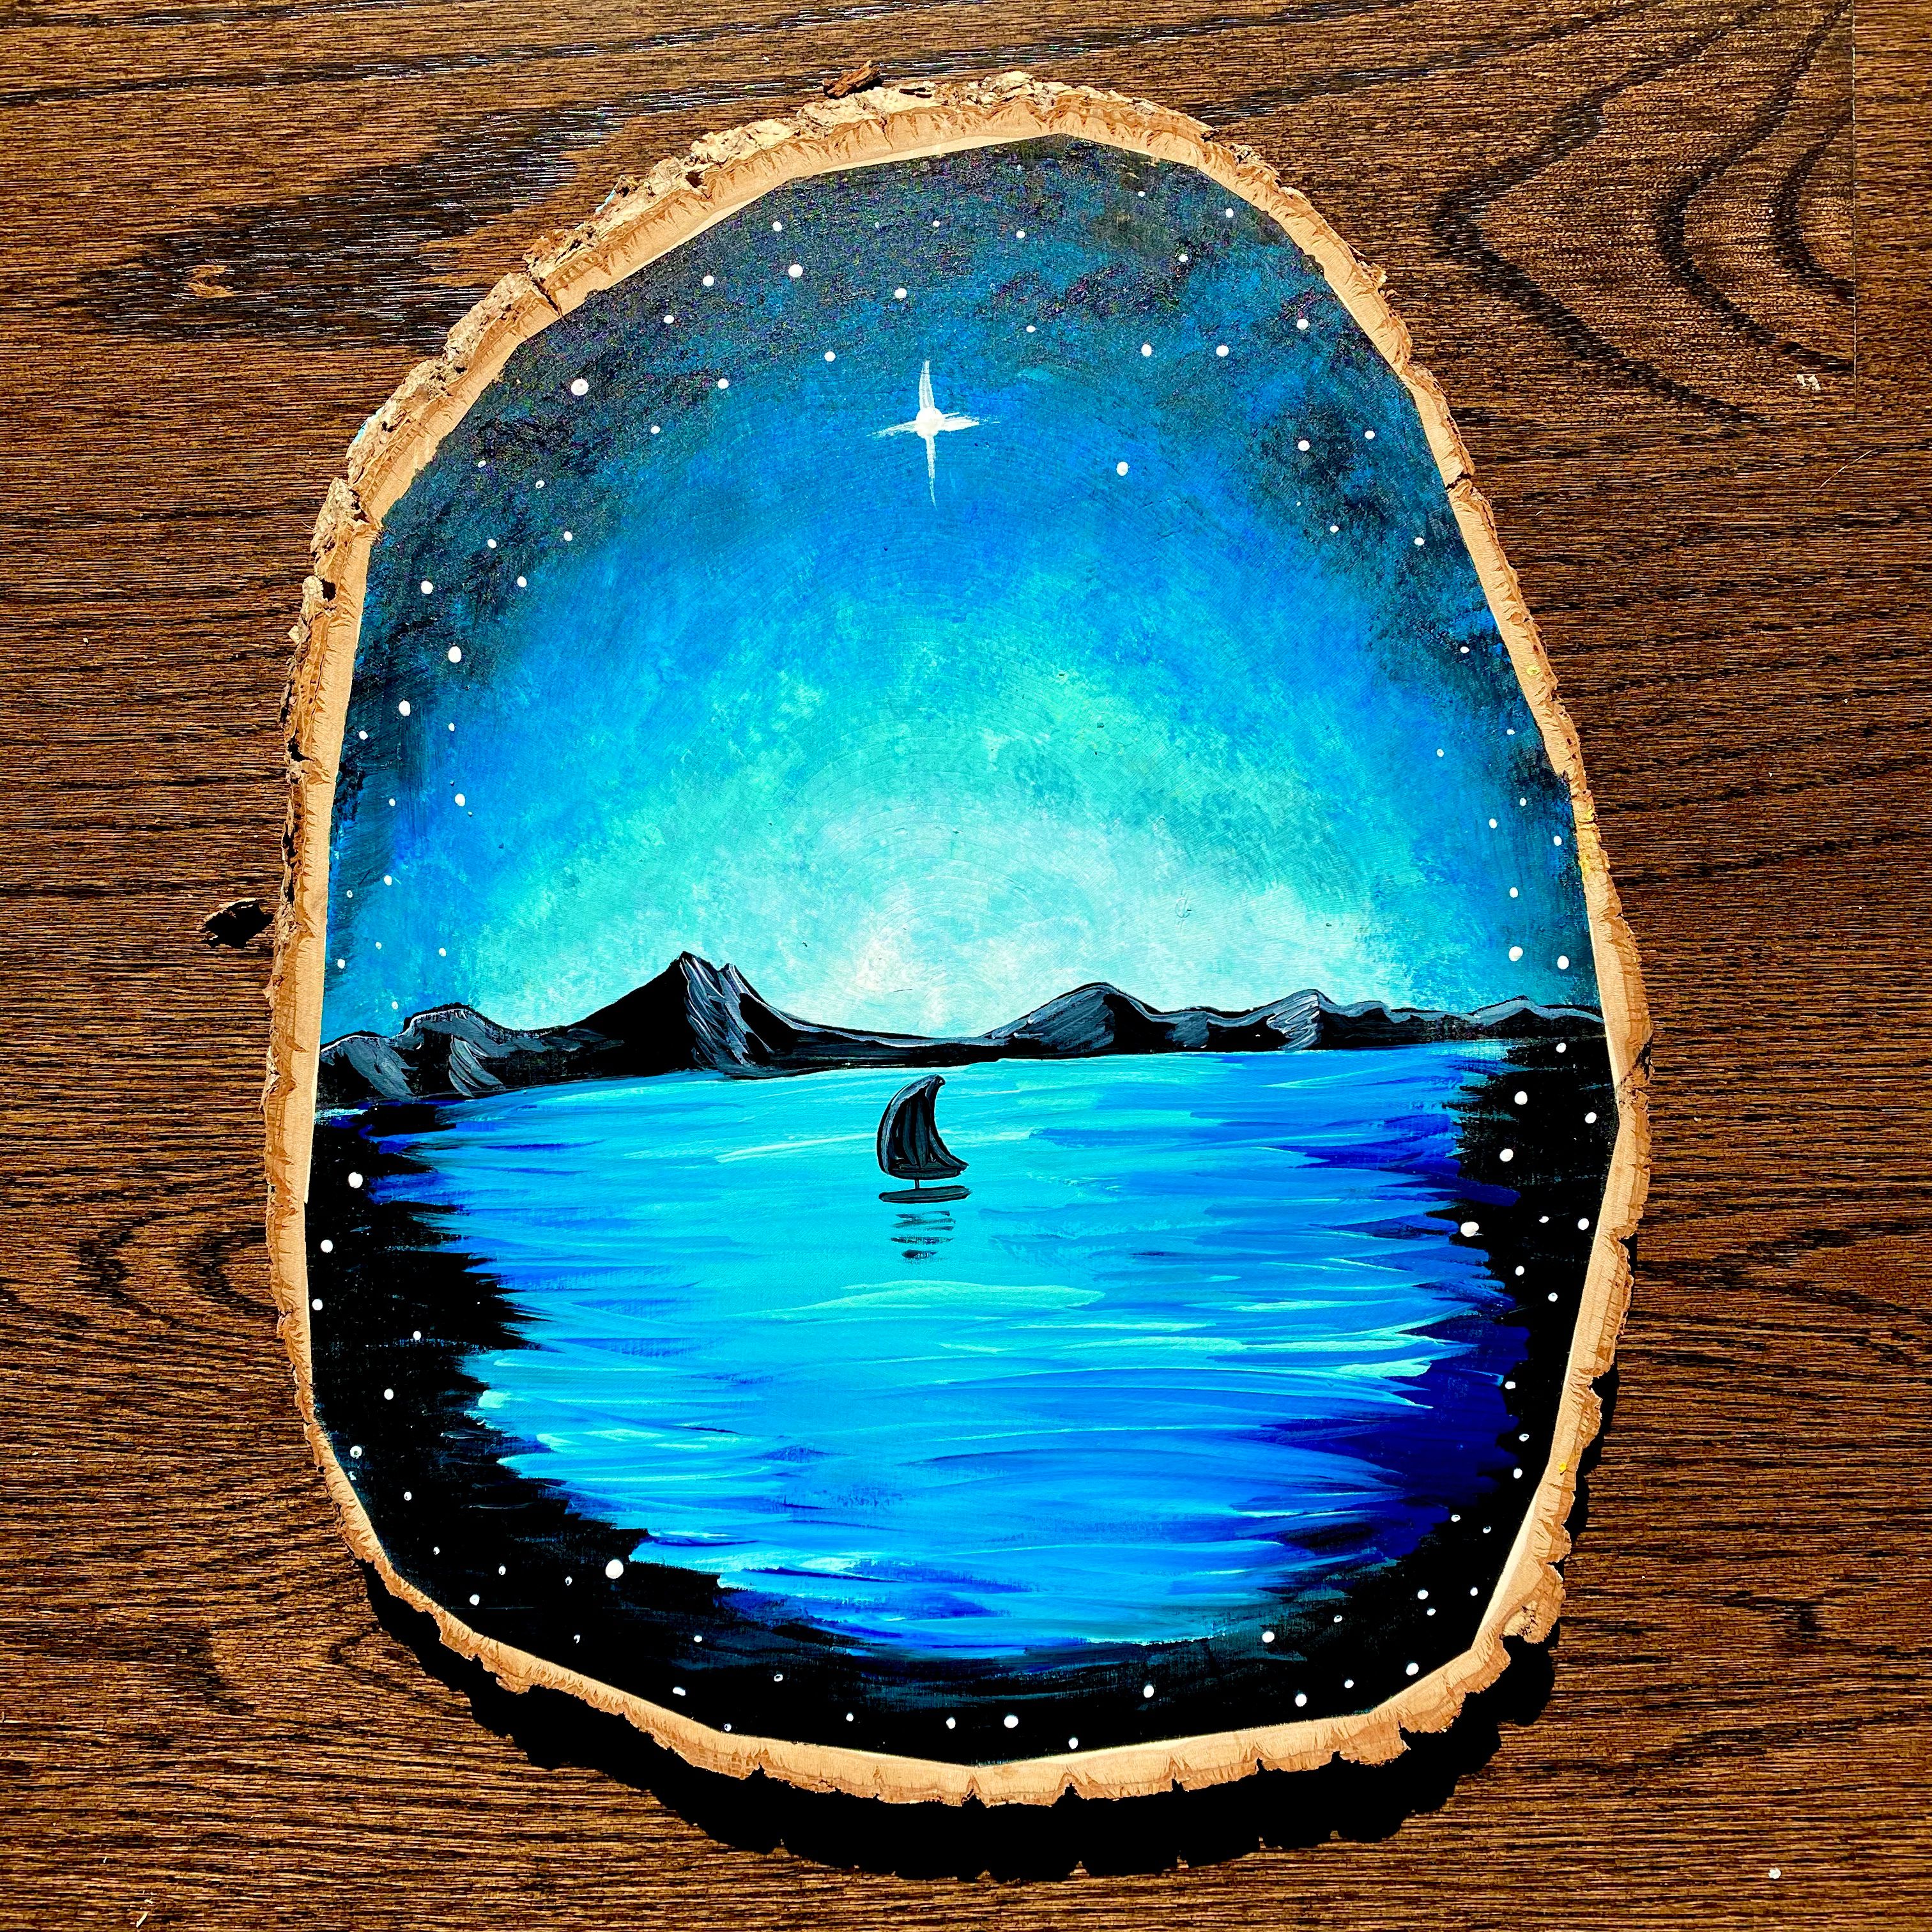 A Follow the Stars To Lead You Home Rustic Wood Slice experience project by Yaymaker